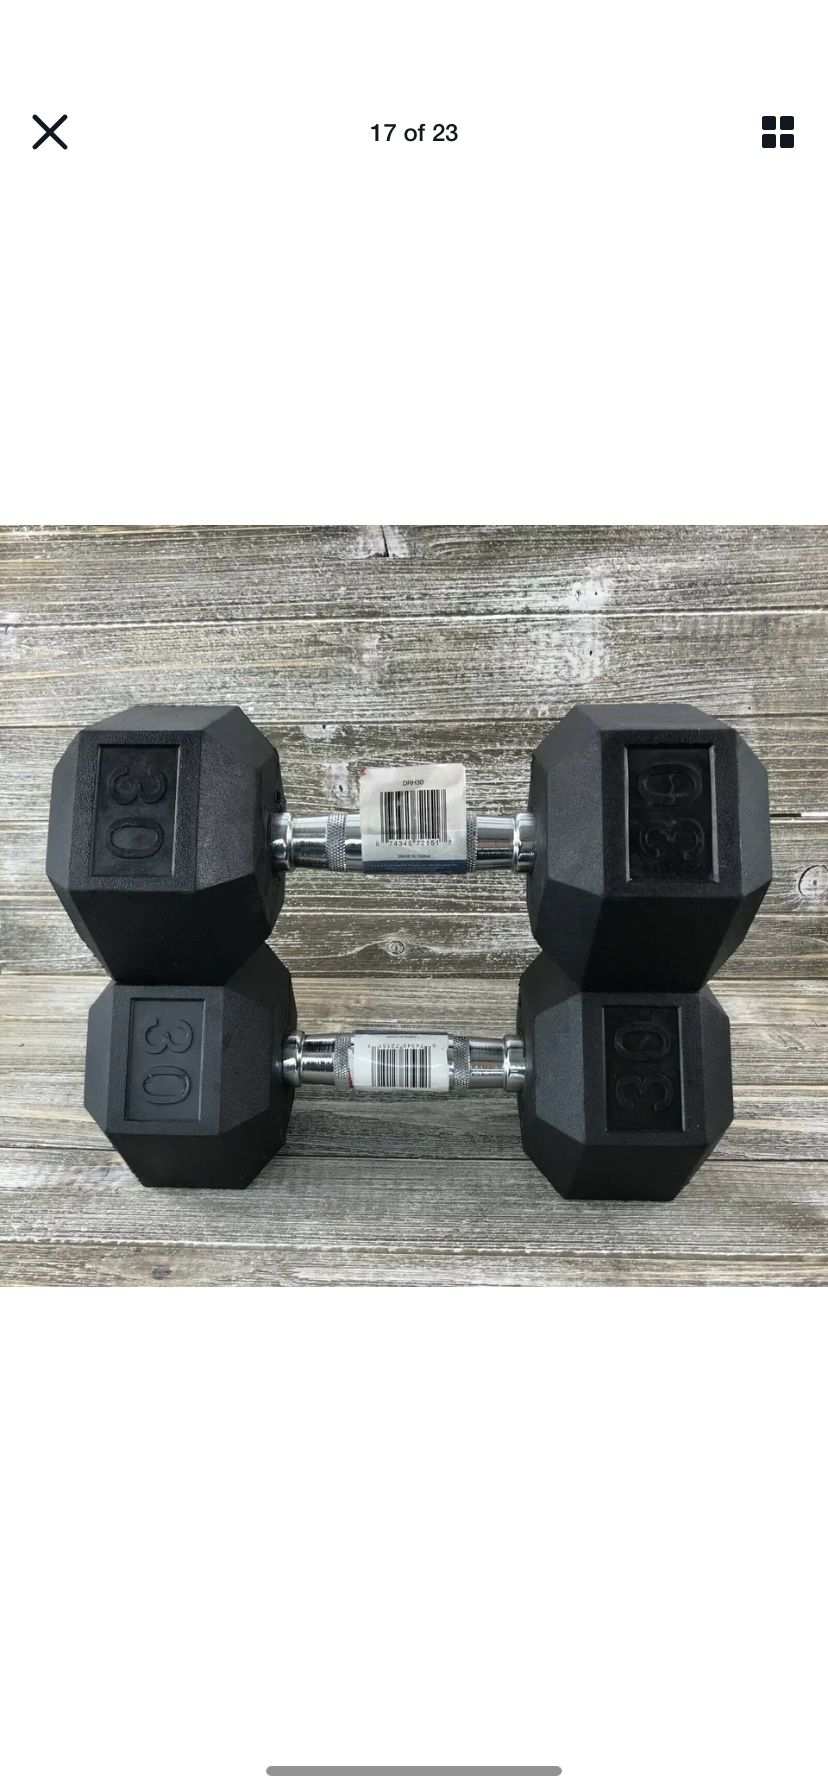 5s 10s 20s 30s 40s 50s dumbbells for sale